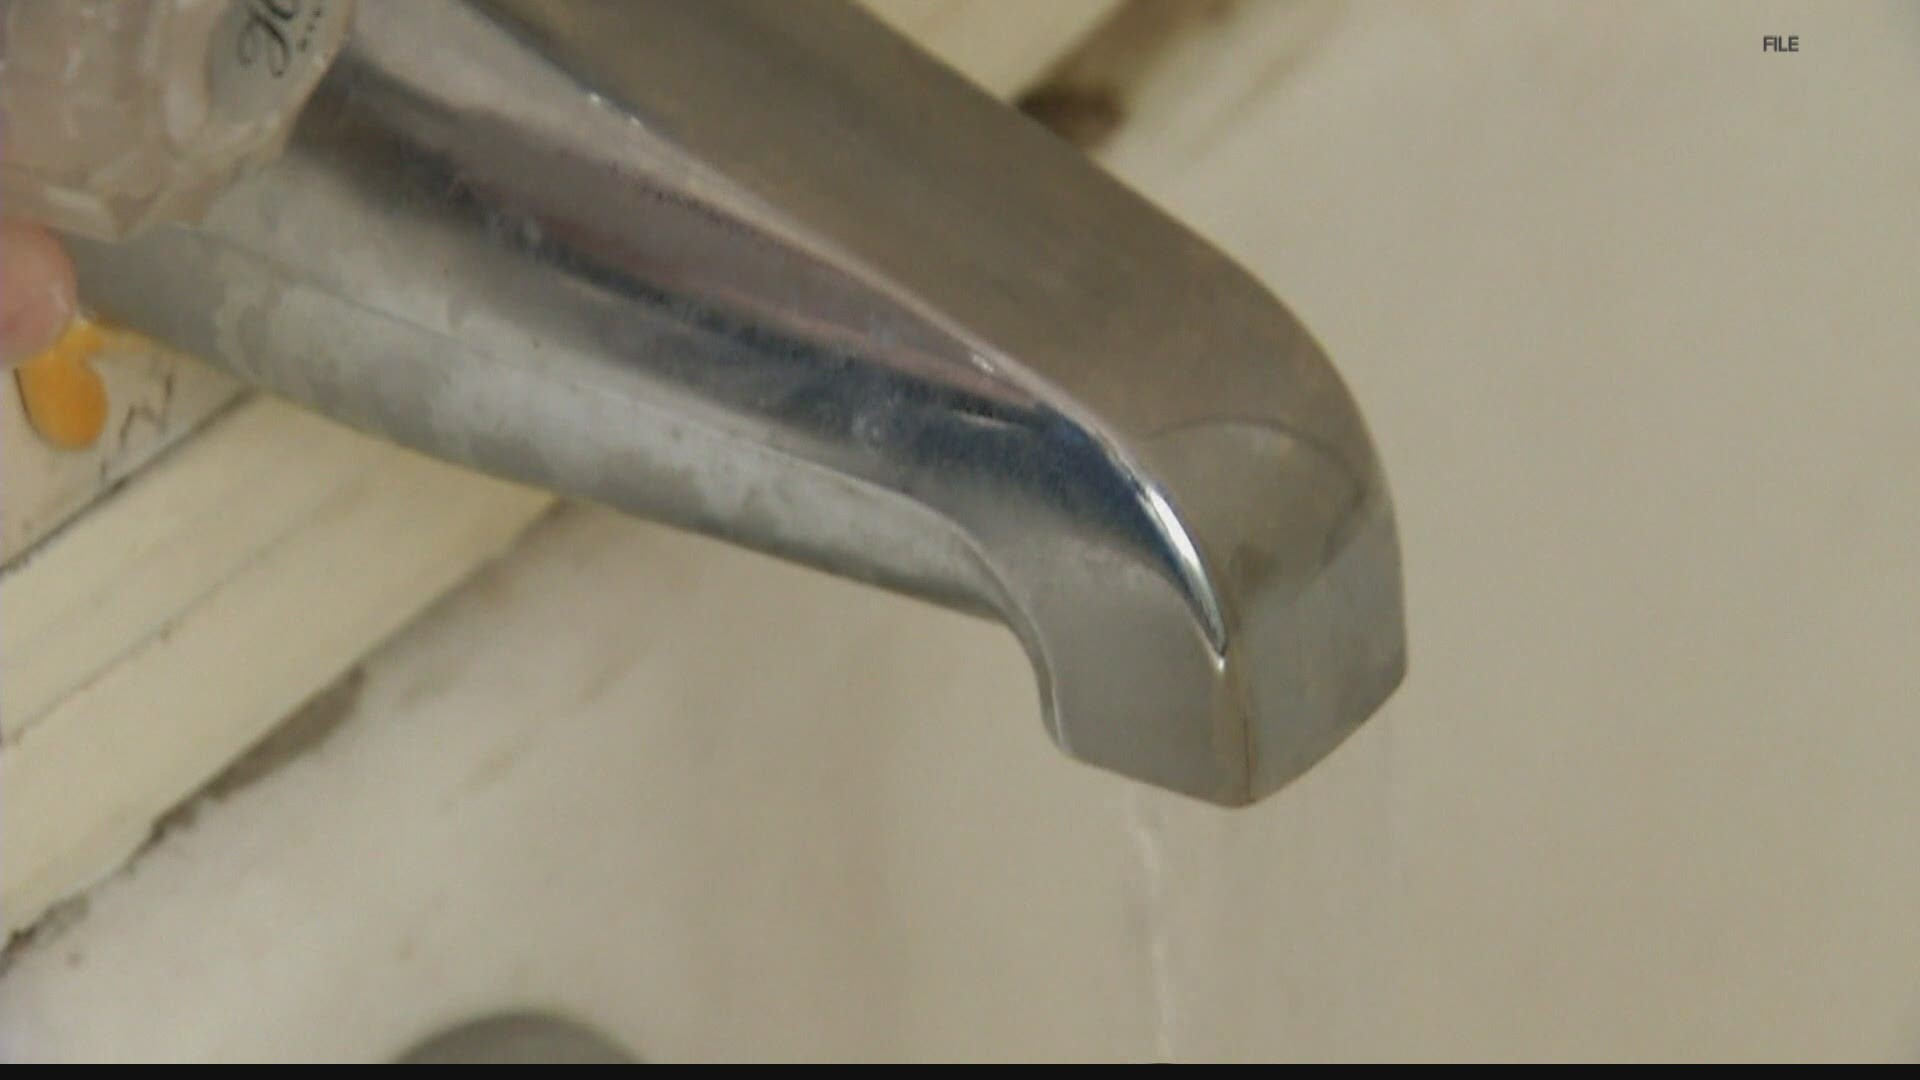 IUPUI said there were pockets of lead contamination in Indianapolis, and have partnered with local churches to provide free home lead testing kits.